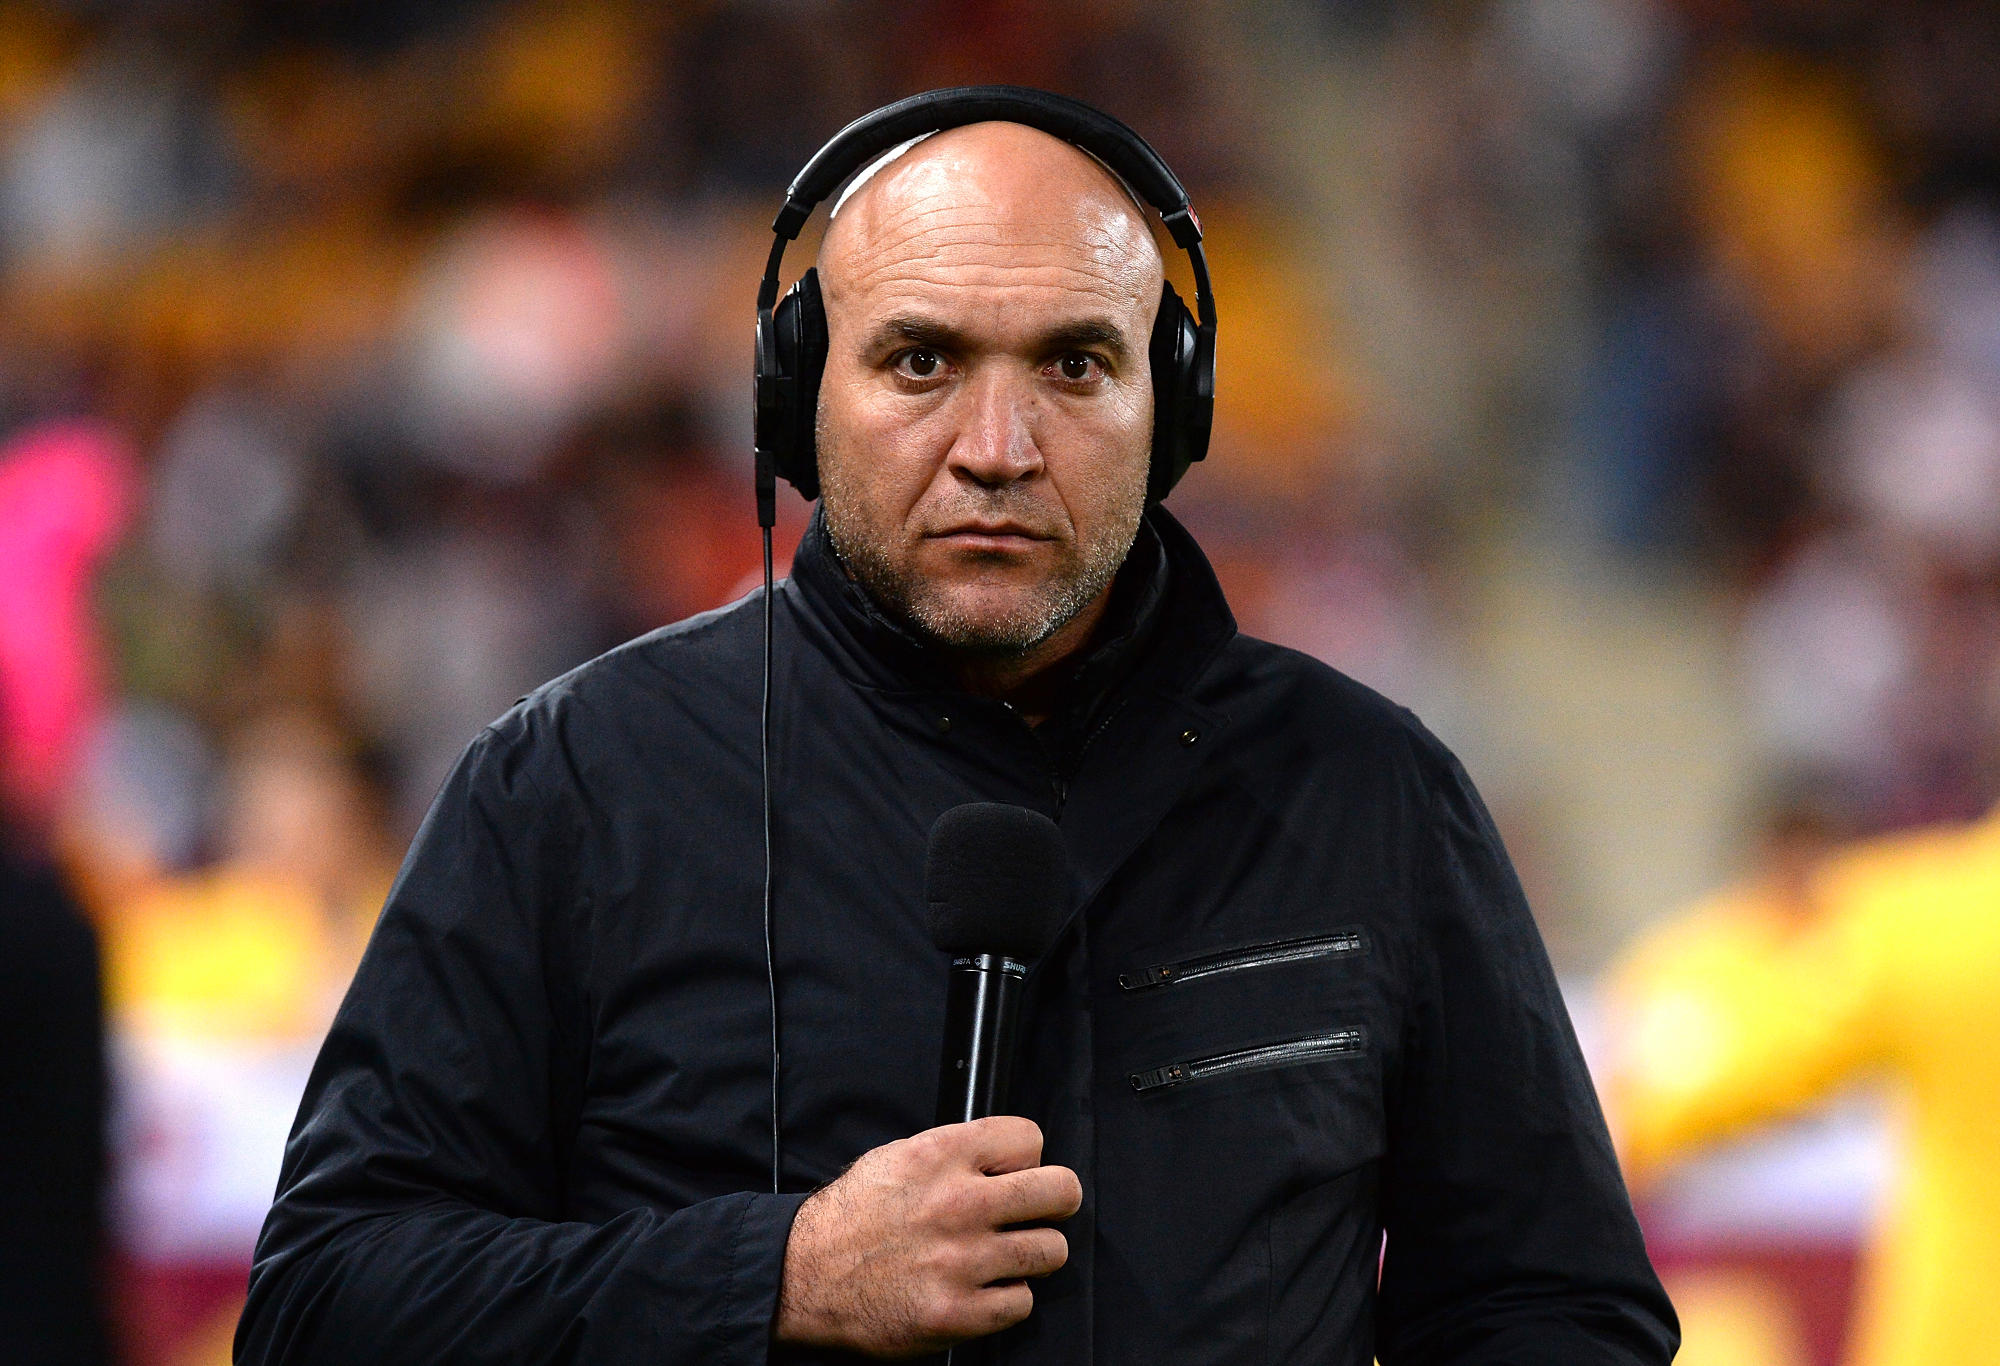 Gorden Tallis stands on the sidelines in commentary gear.